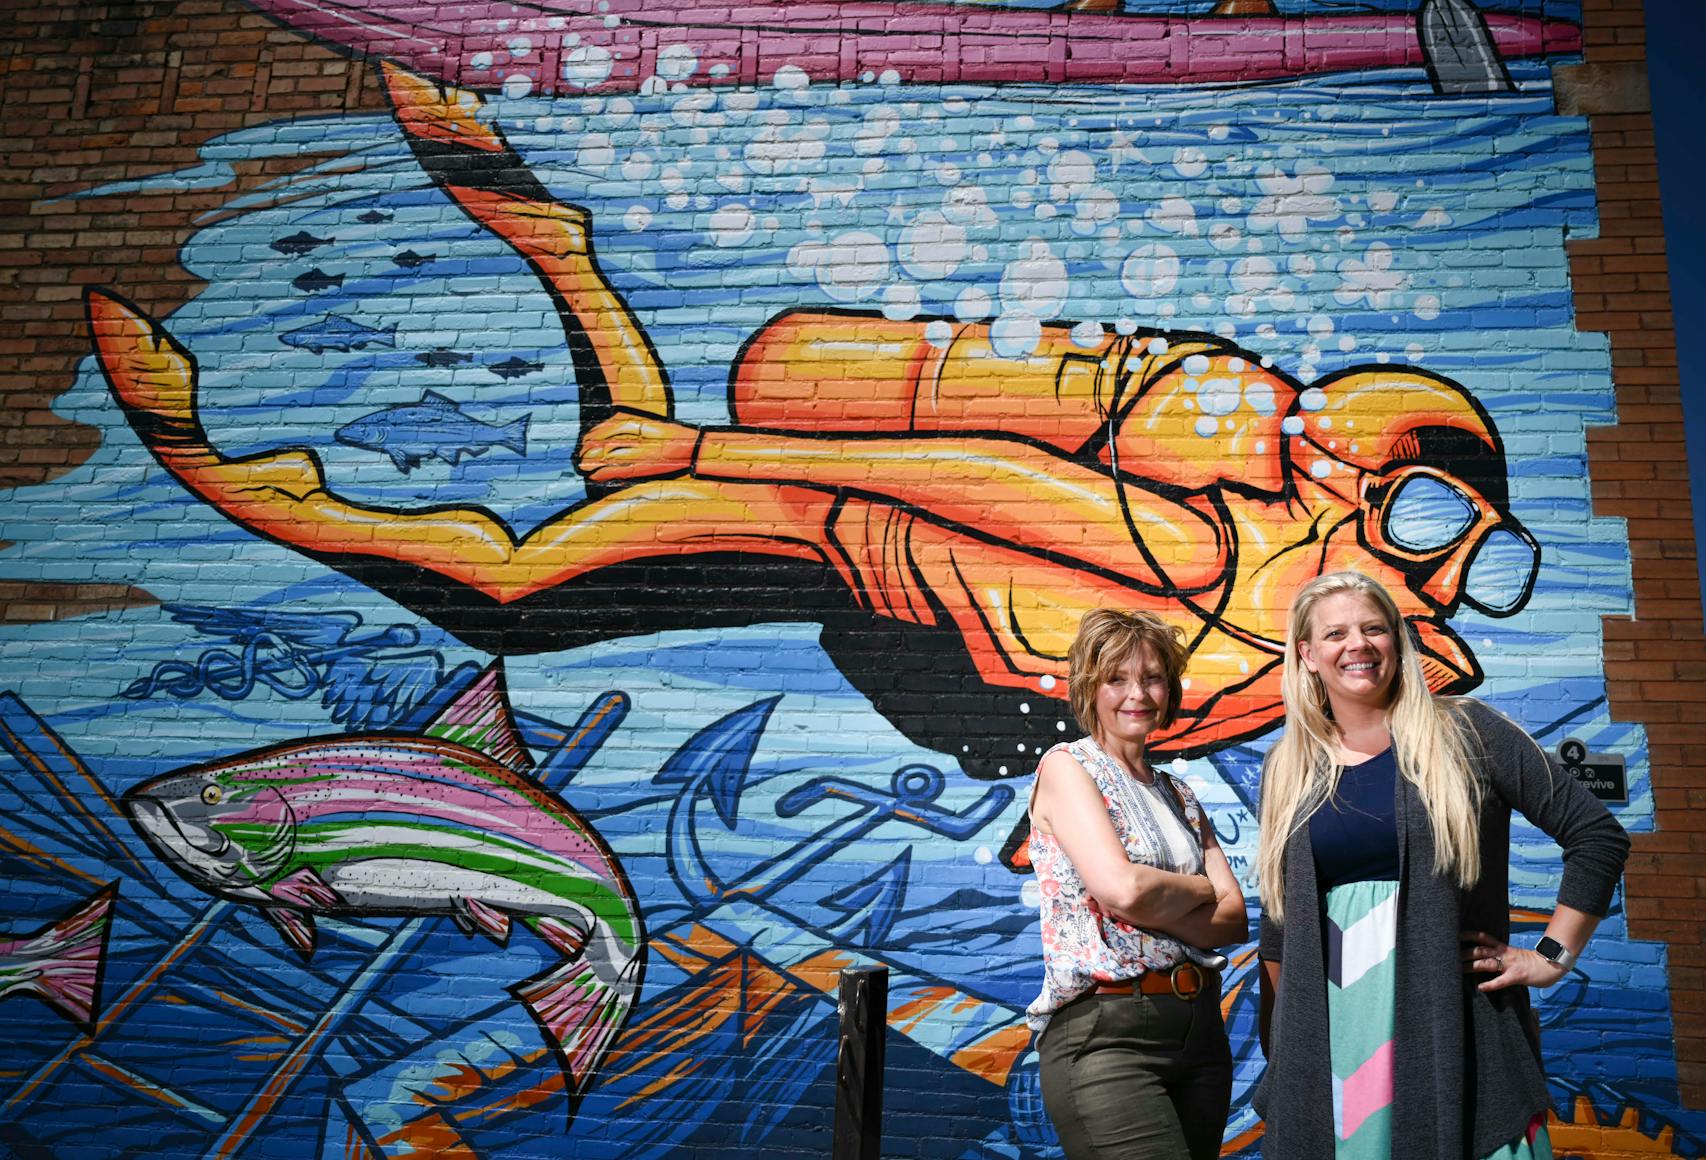 With input and buy-in from Cuyuna Lakes communities, Michelle LeMieur, left, and Johnna Johnson and other residents have led revitilization projects. One of them is public art: eight building murals.